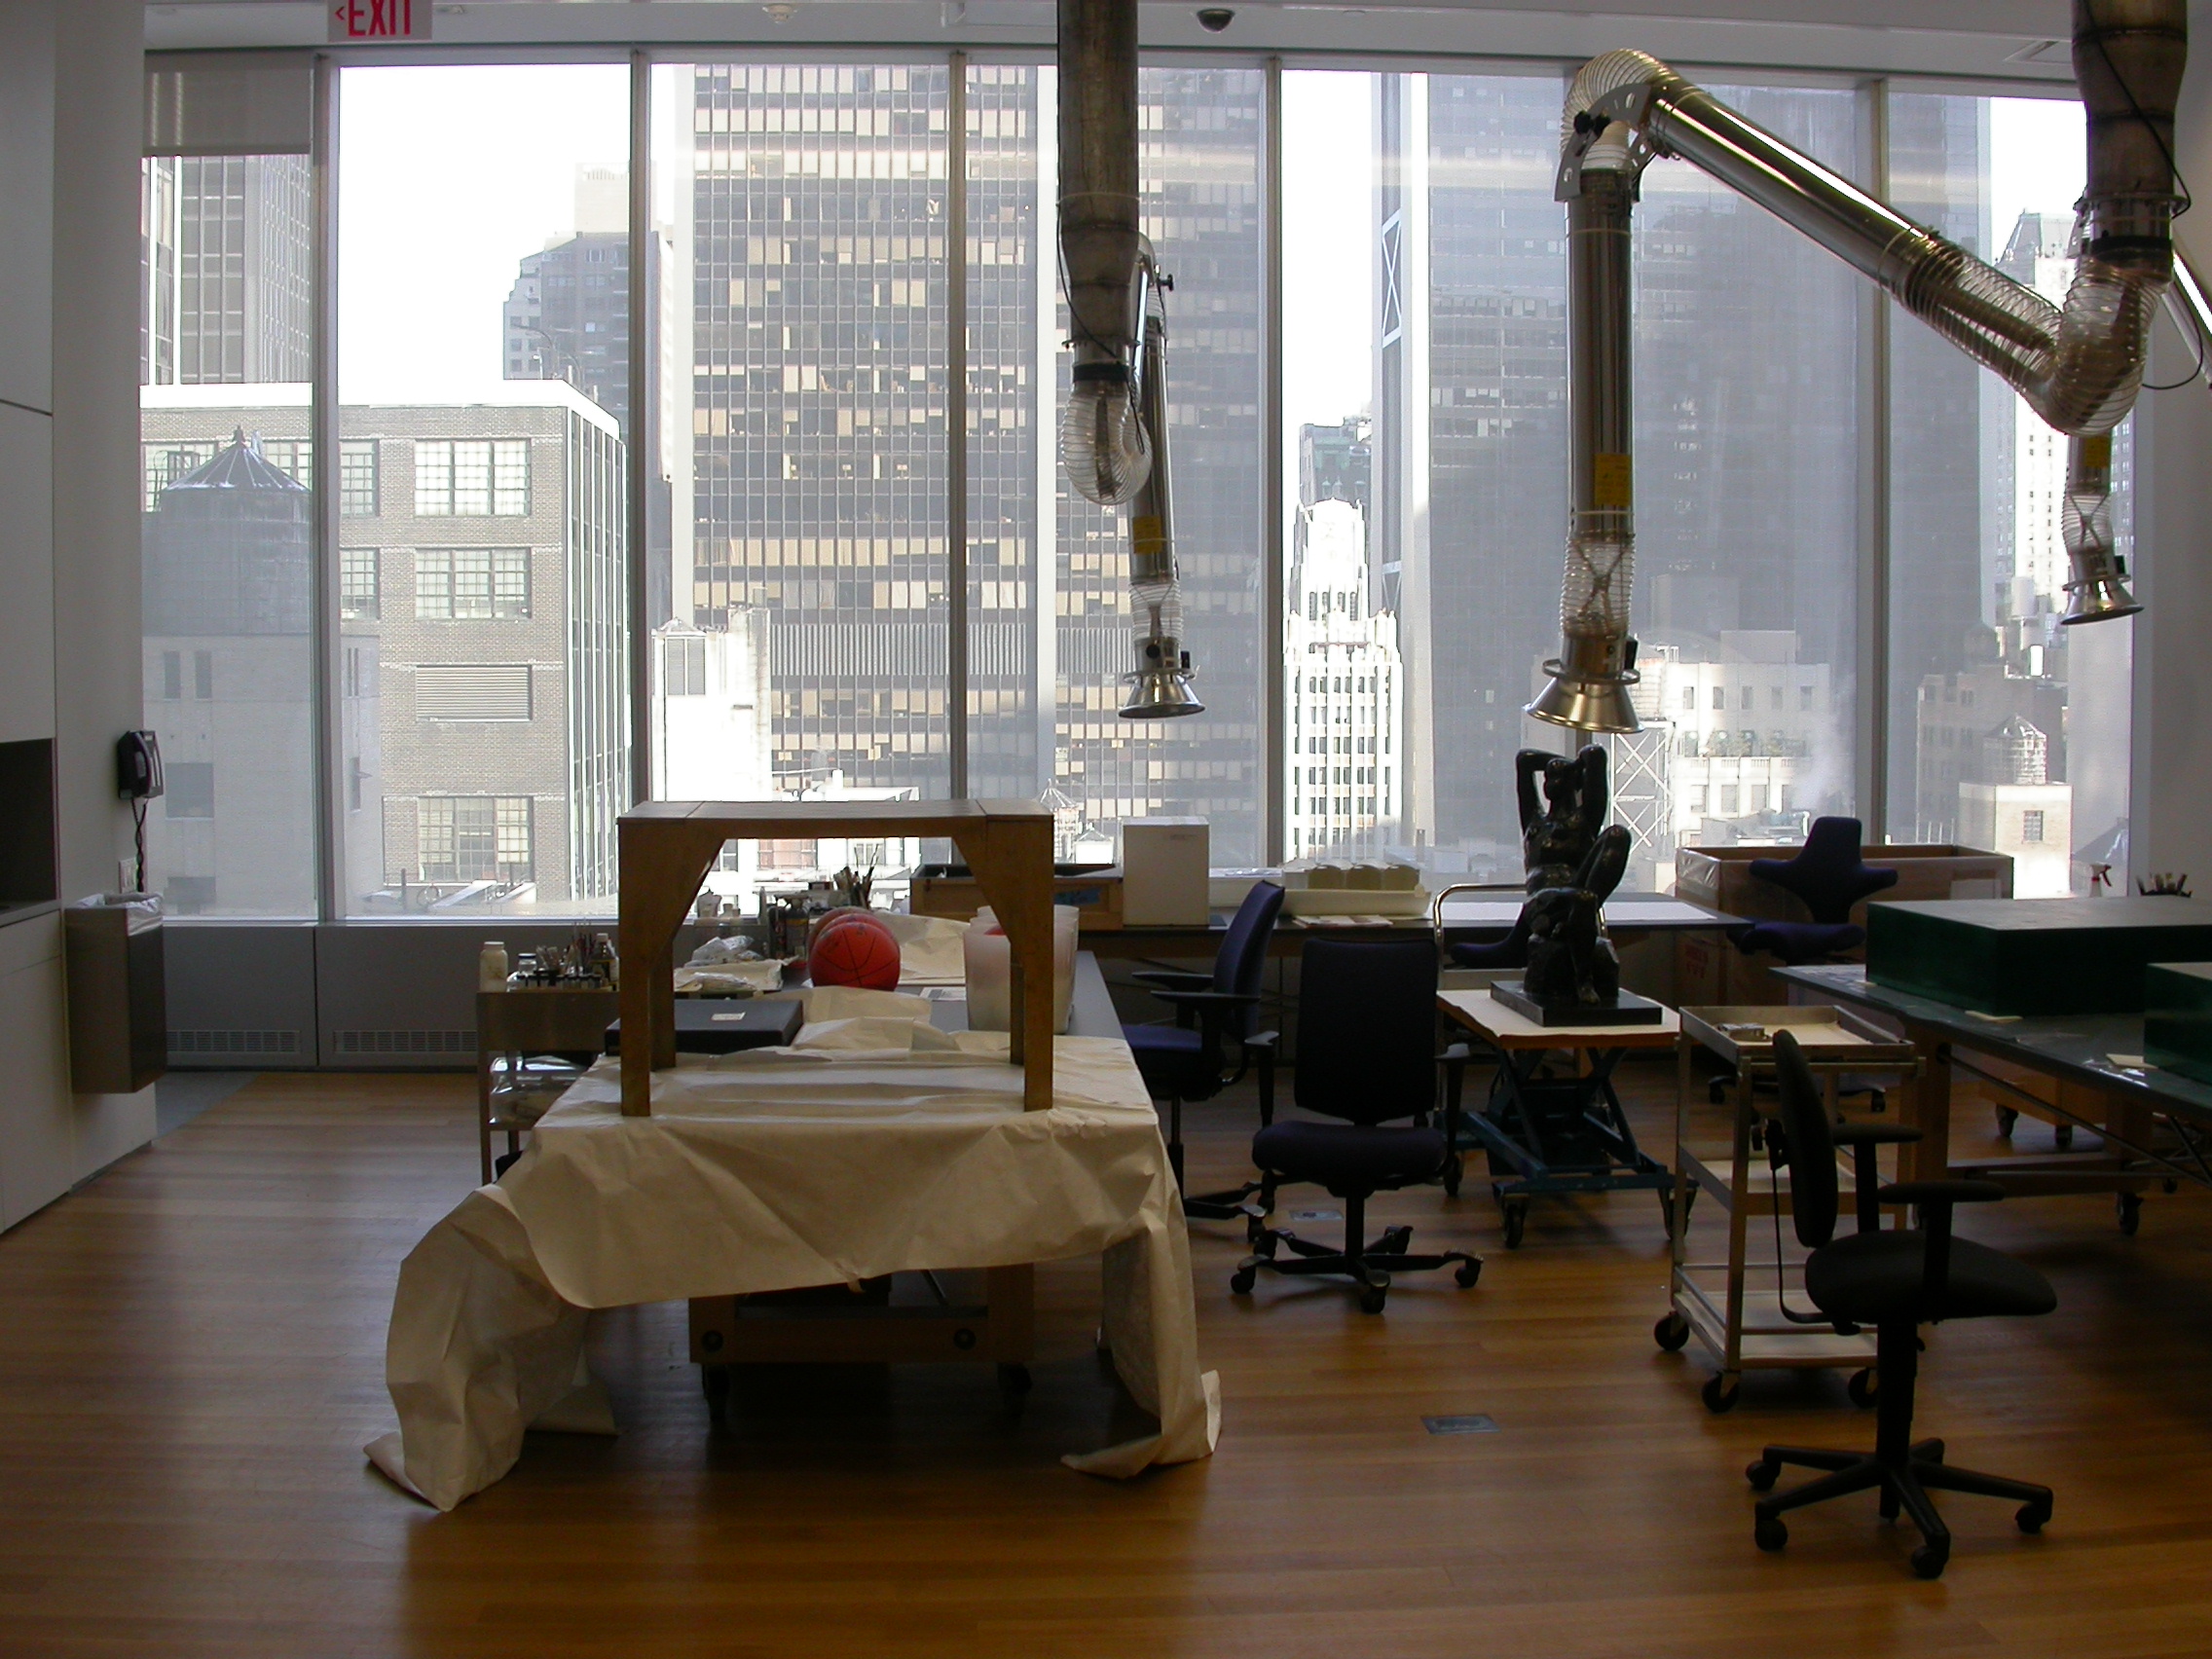 Looking out the windows of MoMA's Conservation Studio